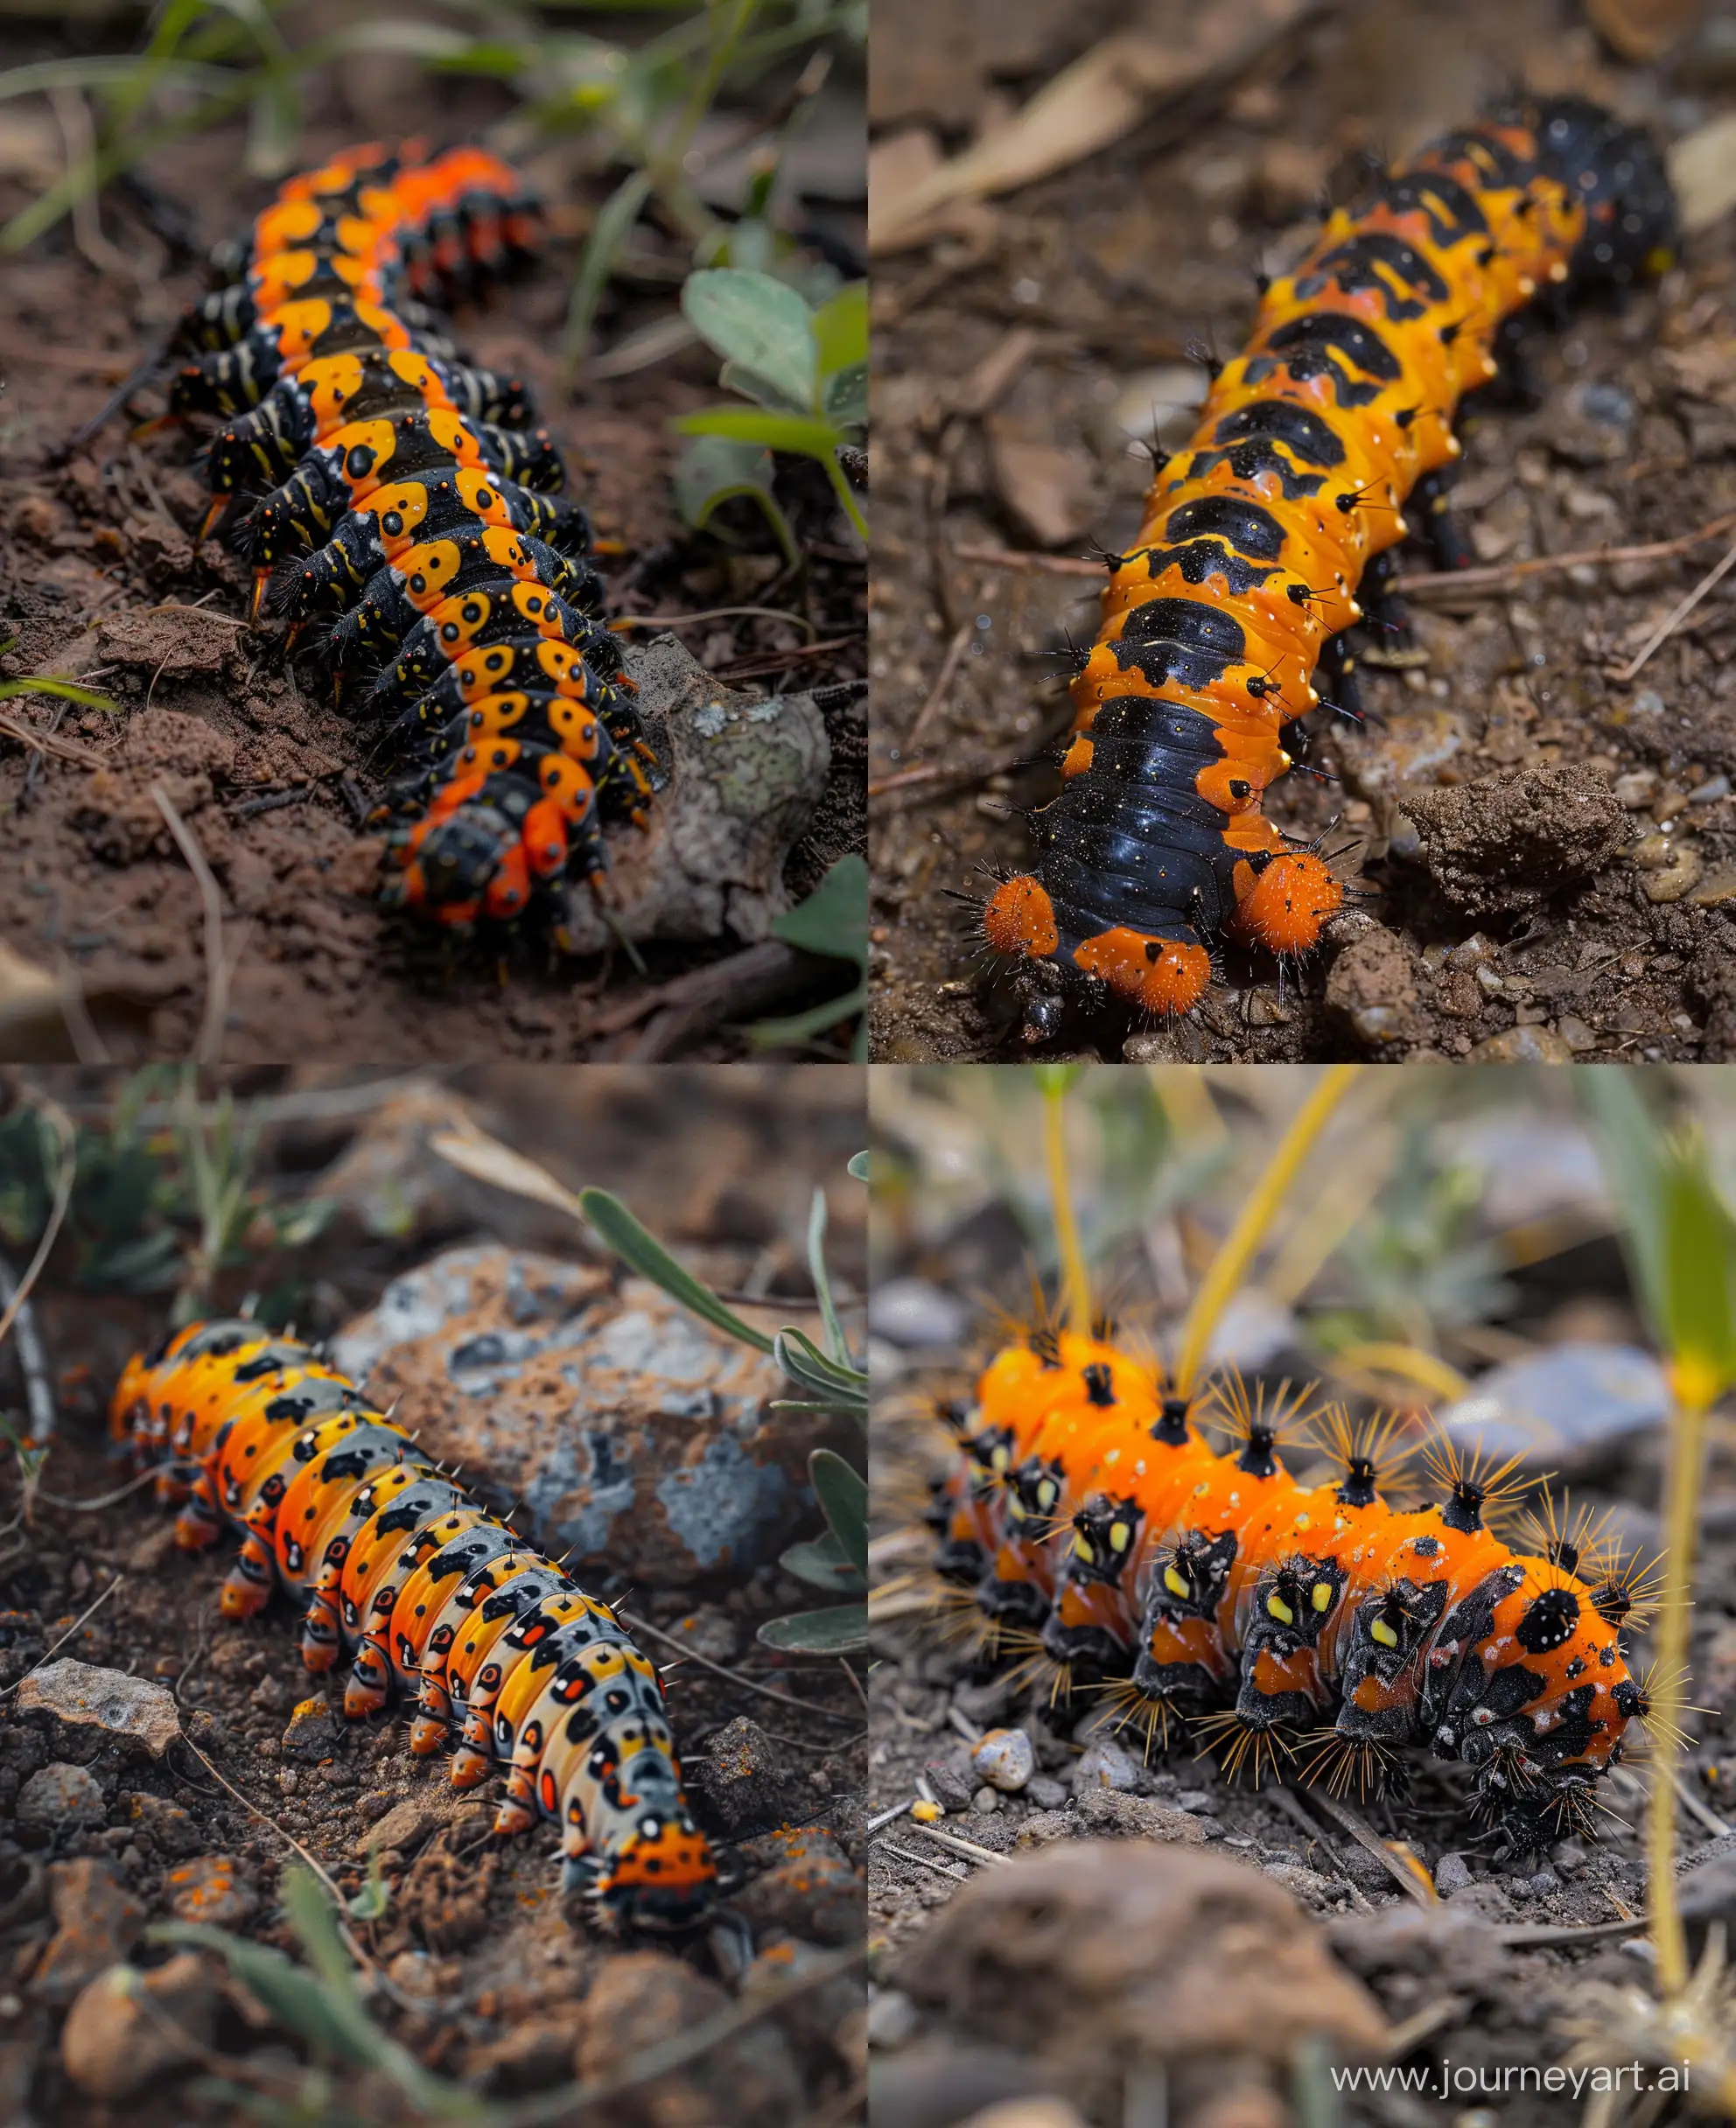 Vibrant-Orange-and-Black-Caterpillar-Crawling-on-Ground-High-Definition-Sony-FE-35mm-Style